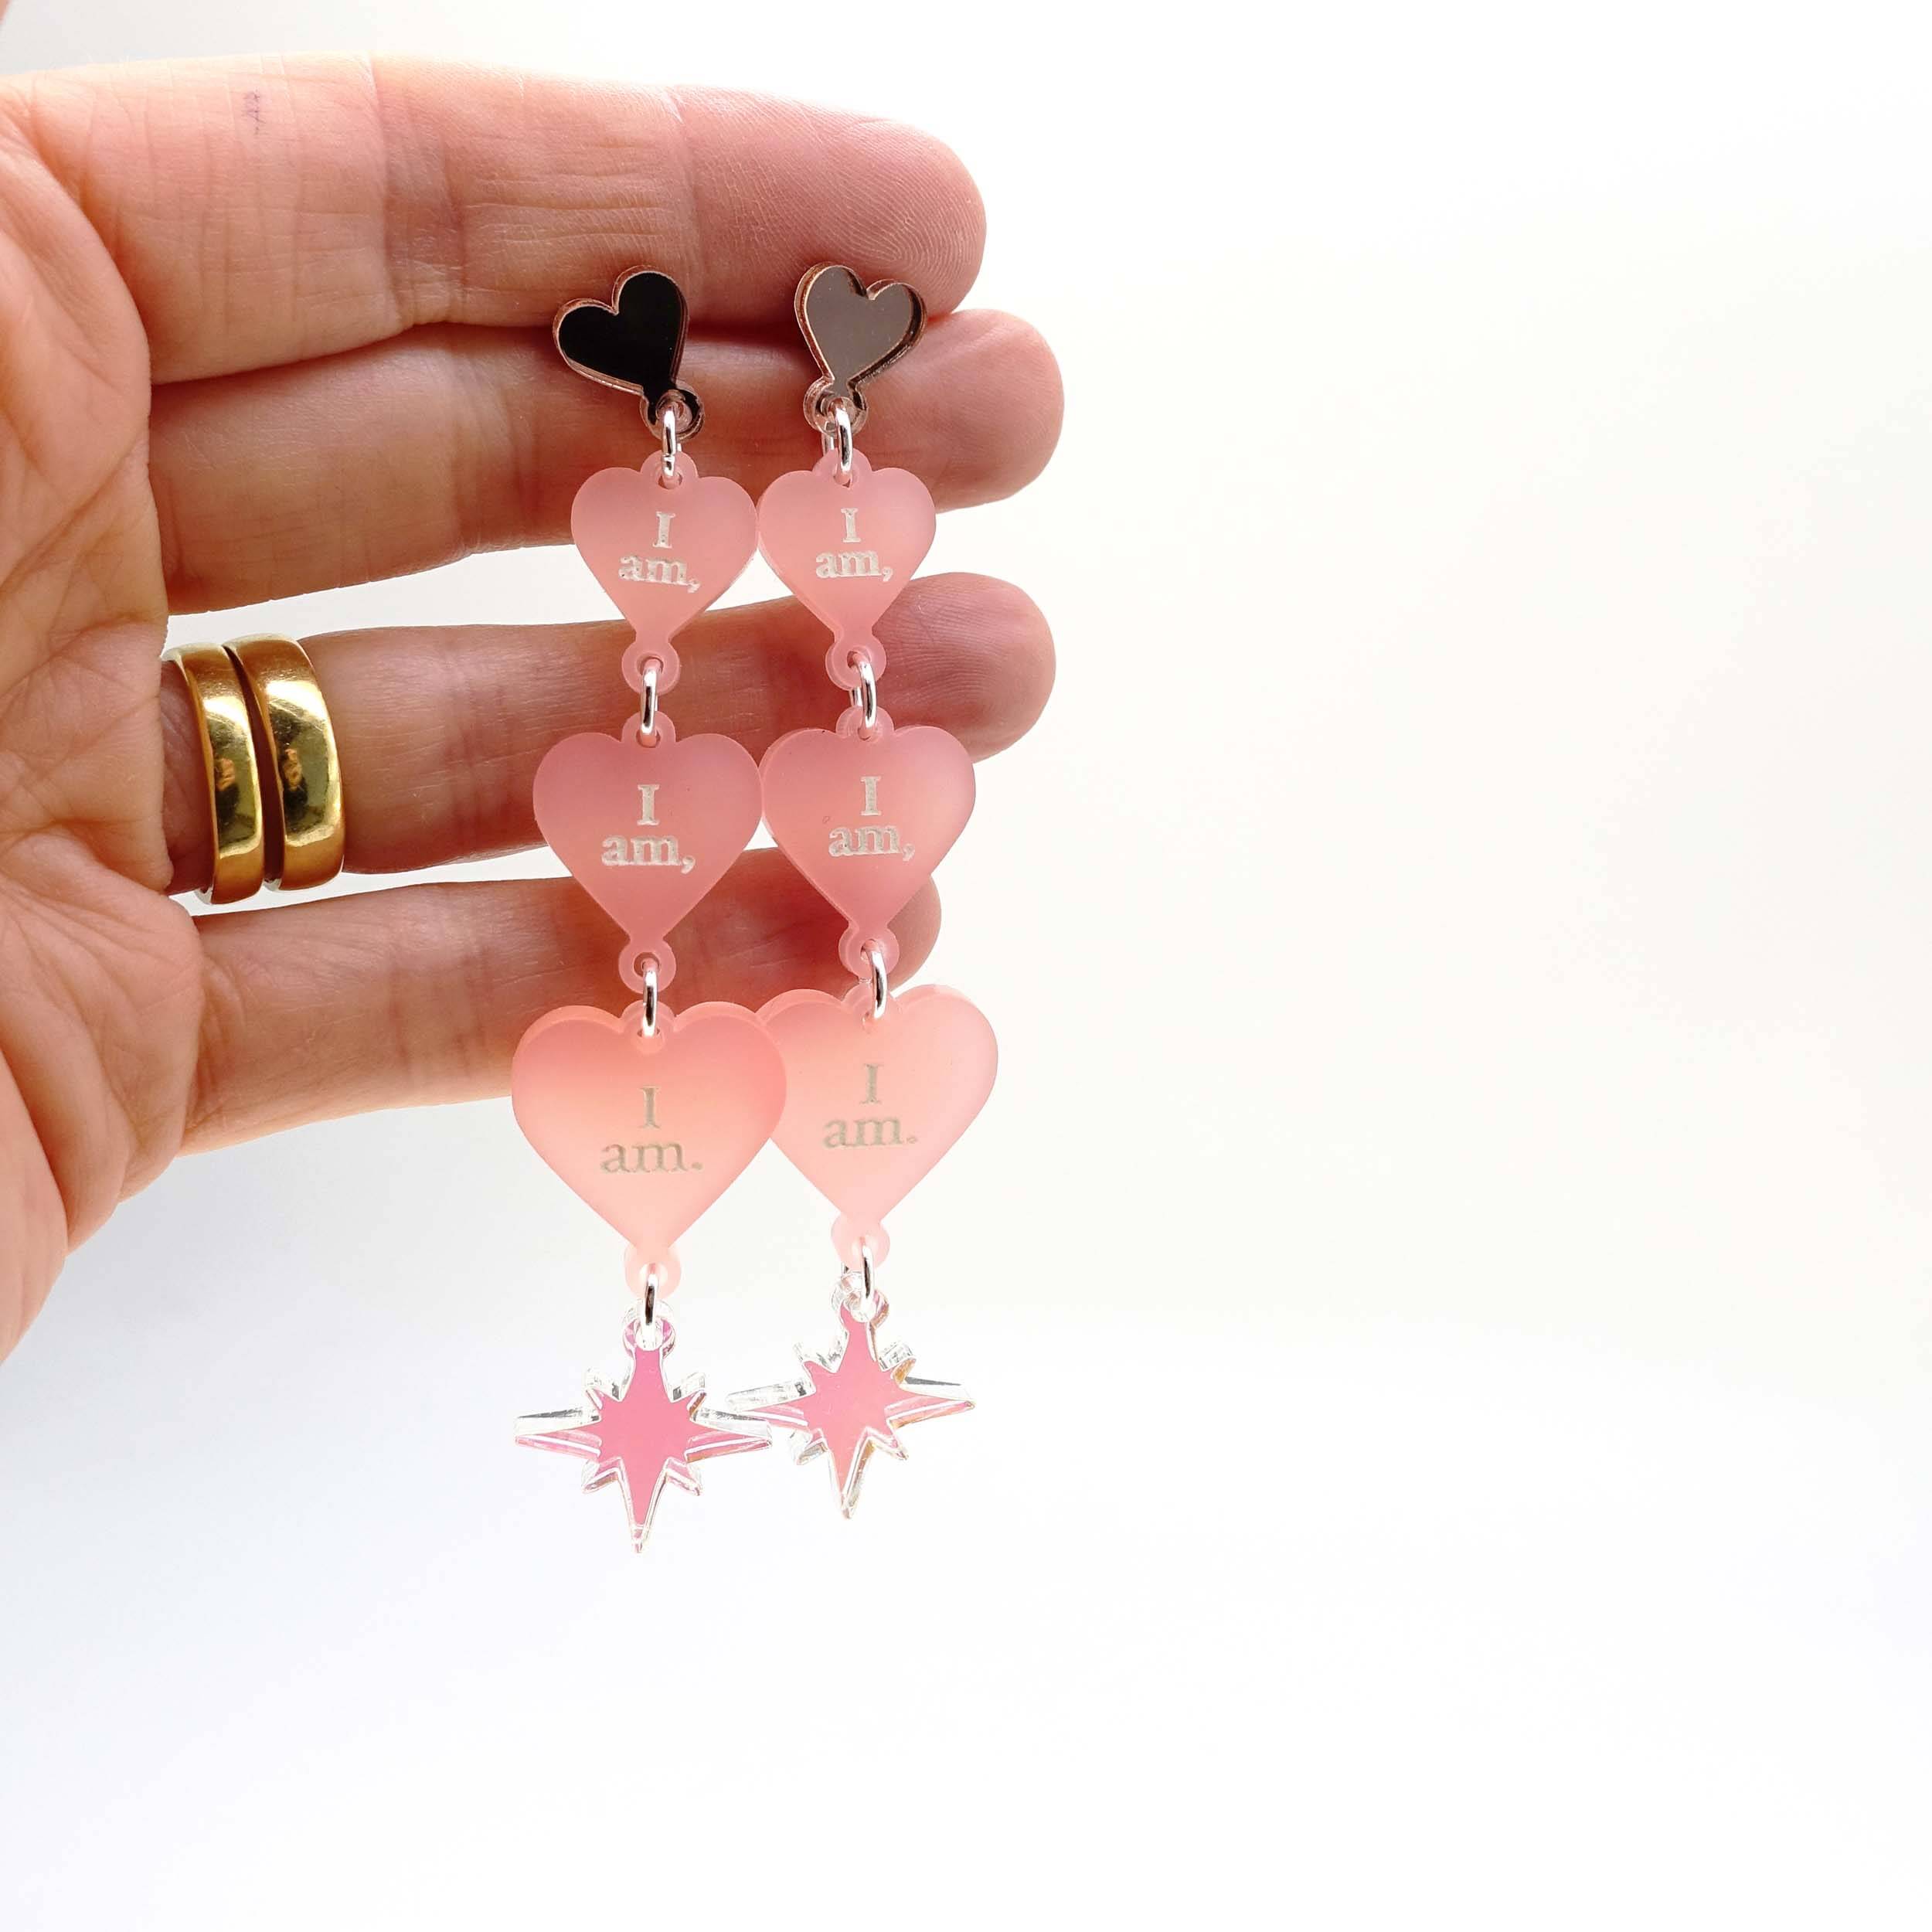 Blush frost  I am I am I am heart drop earrings shown held up for scale. 